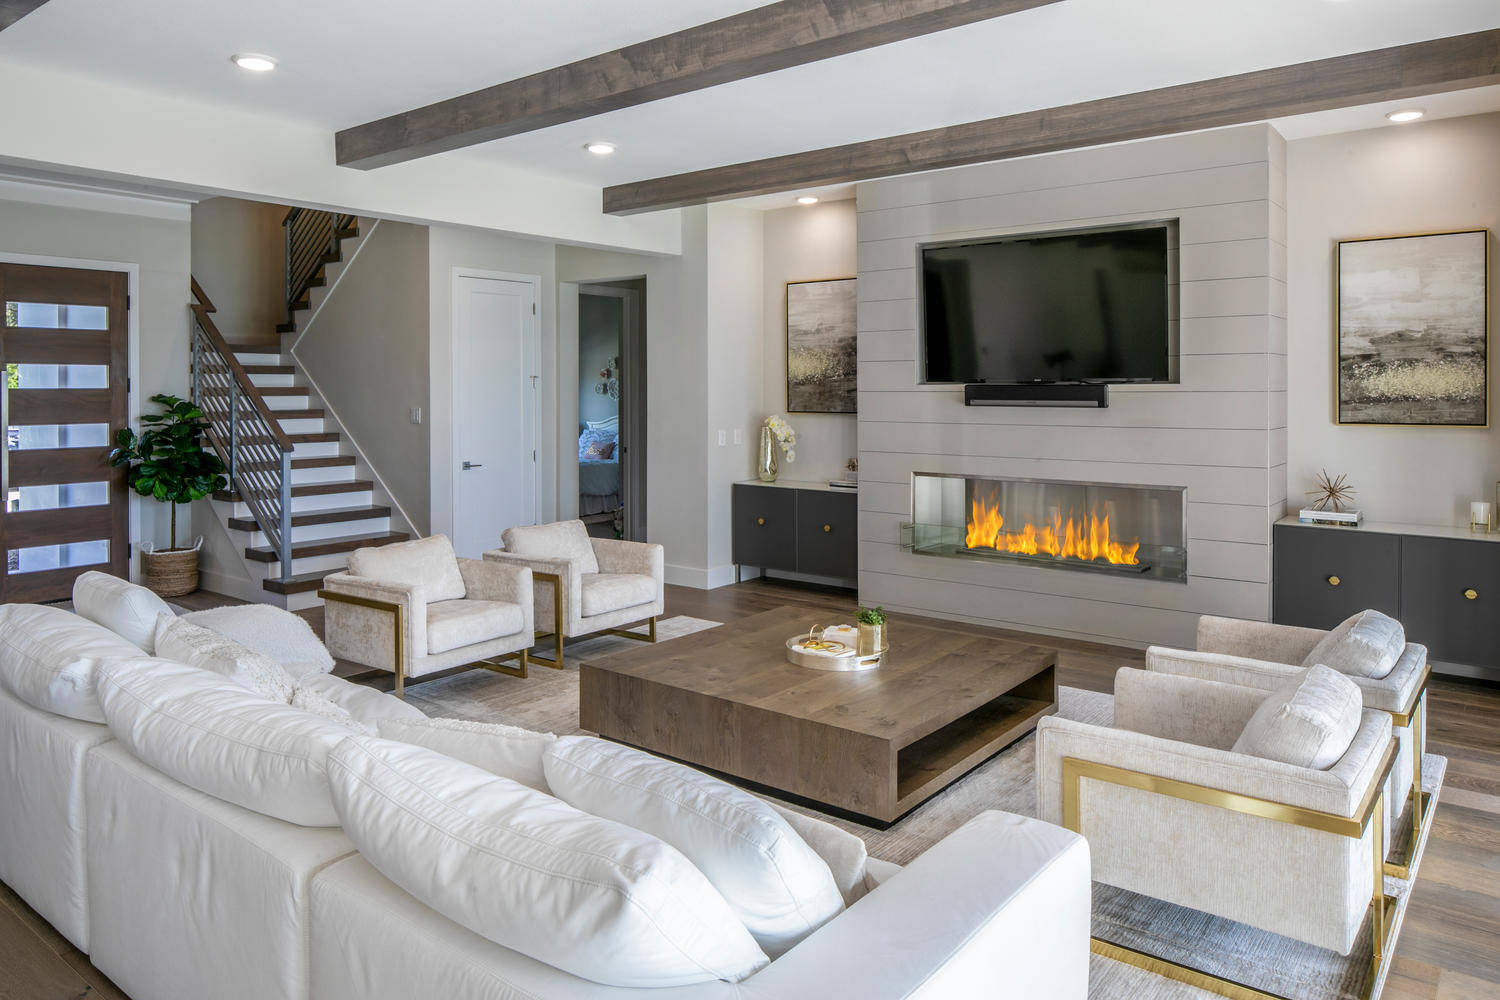 75 Beautiful Modern Living Room Pictures Ideas July 2020 Houzz